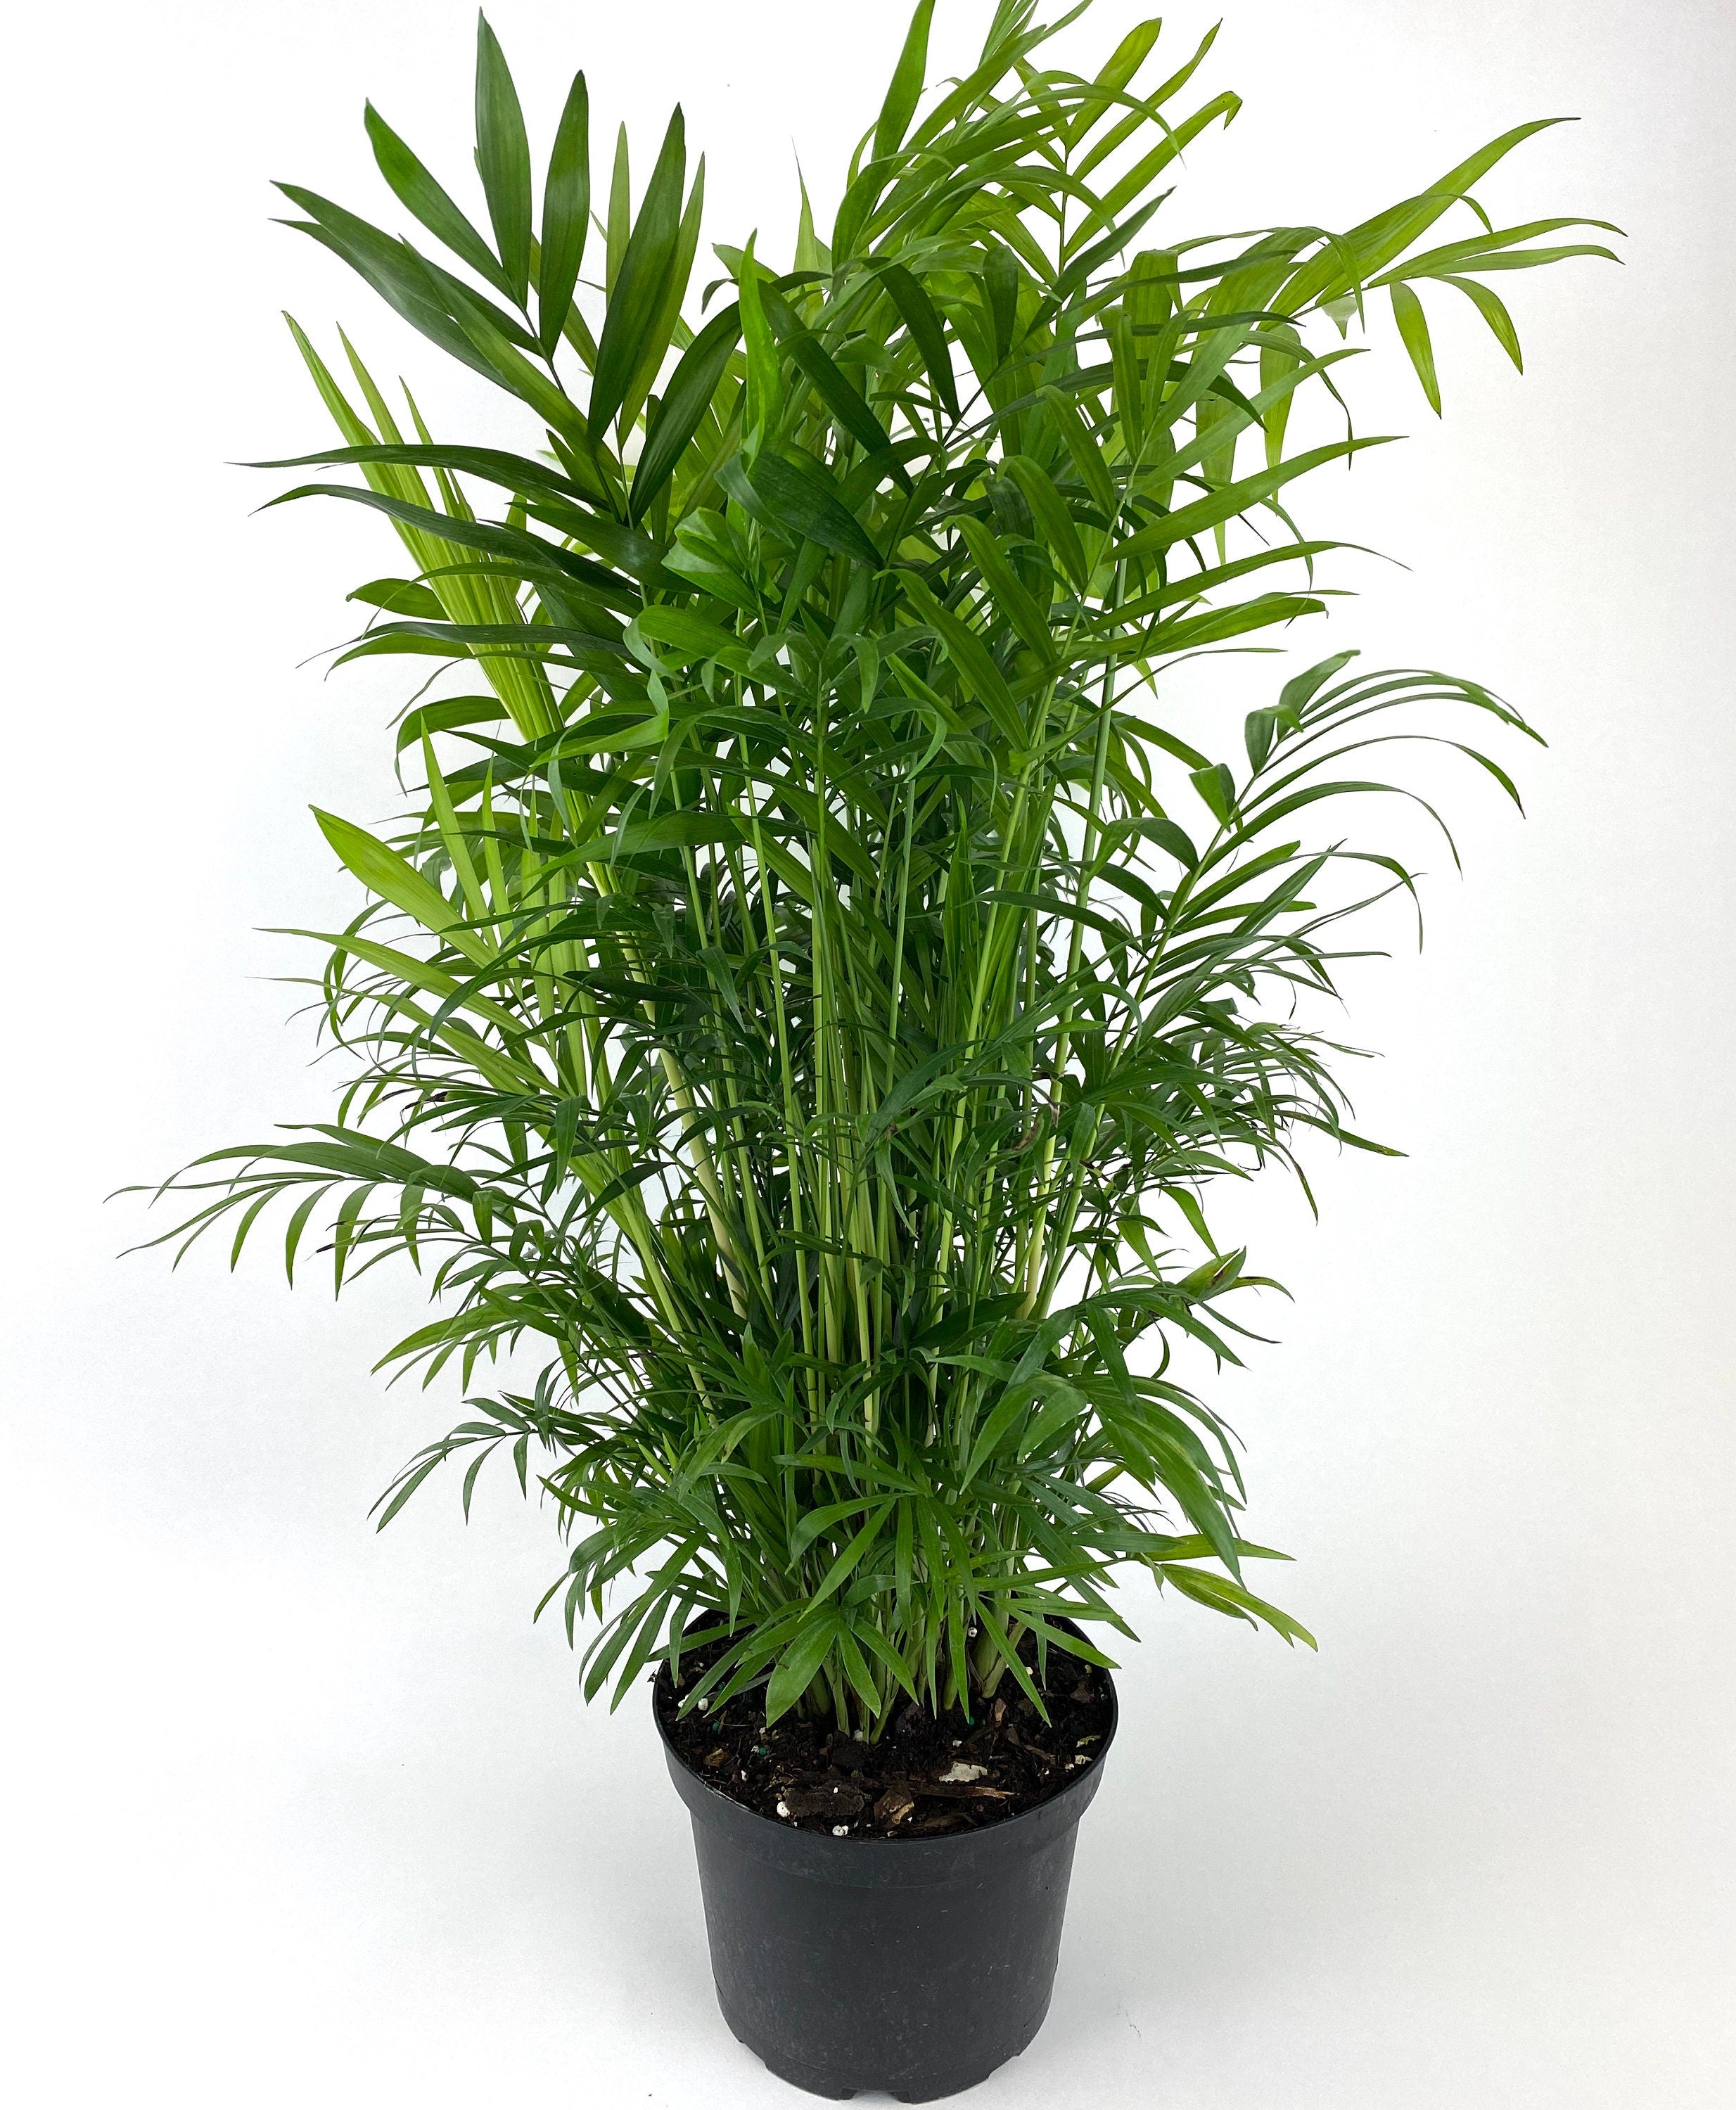 Palm Parlor Neanthe Bella Palm, Live Plant Indoor Air Purifier